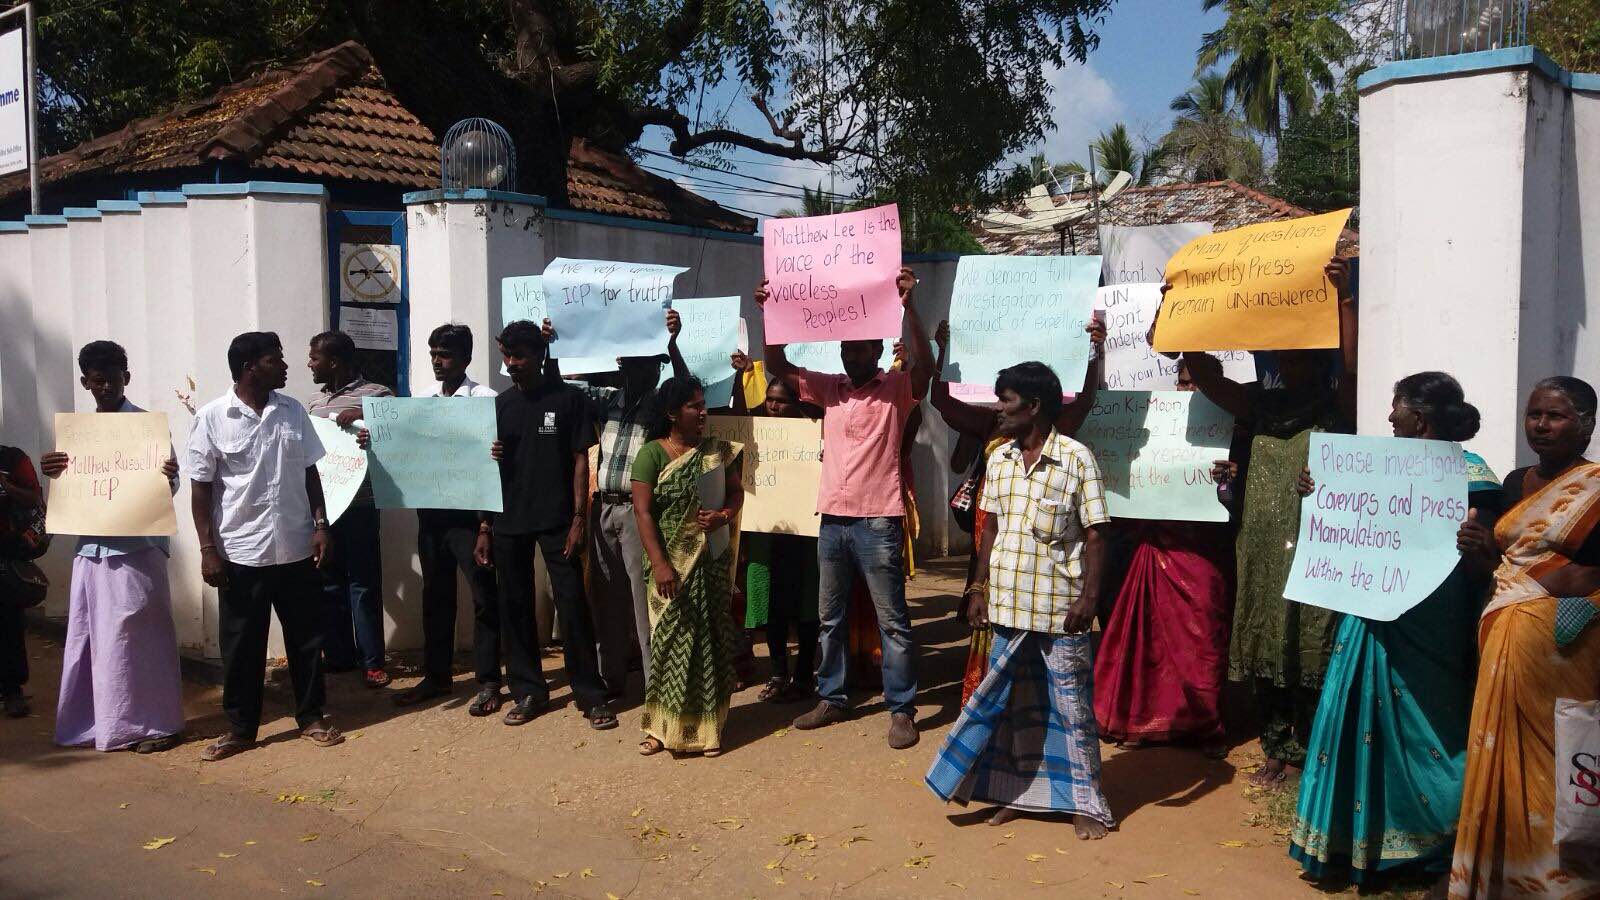 Tamils in Jaffna rally in support of Inner City Press | Tamil Guardian